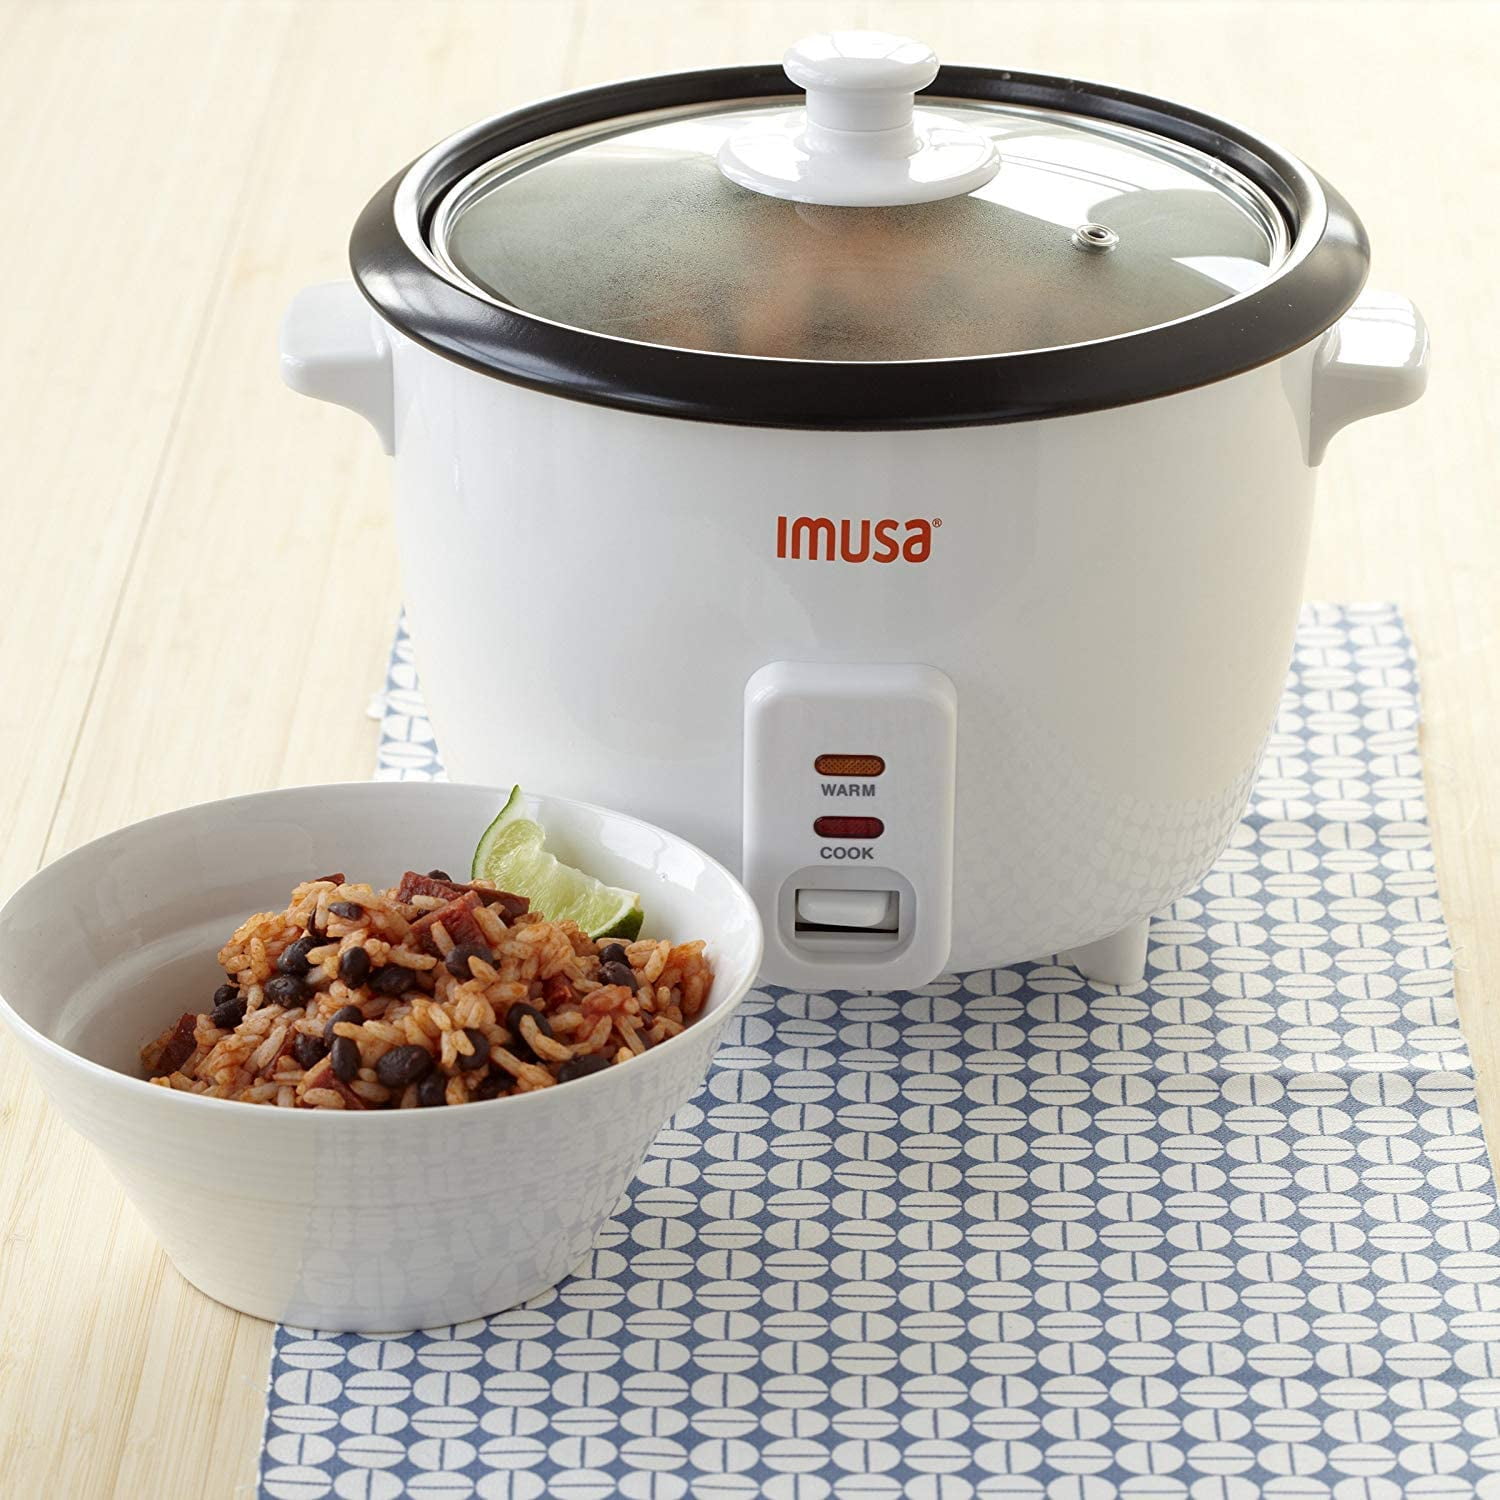 COOKINEX 5CUP ELECTRIC RICE COOKER $45.59